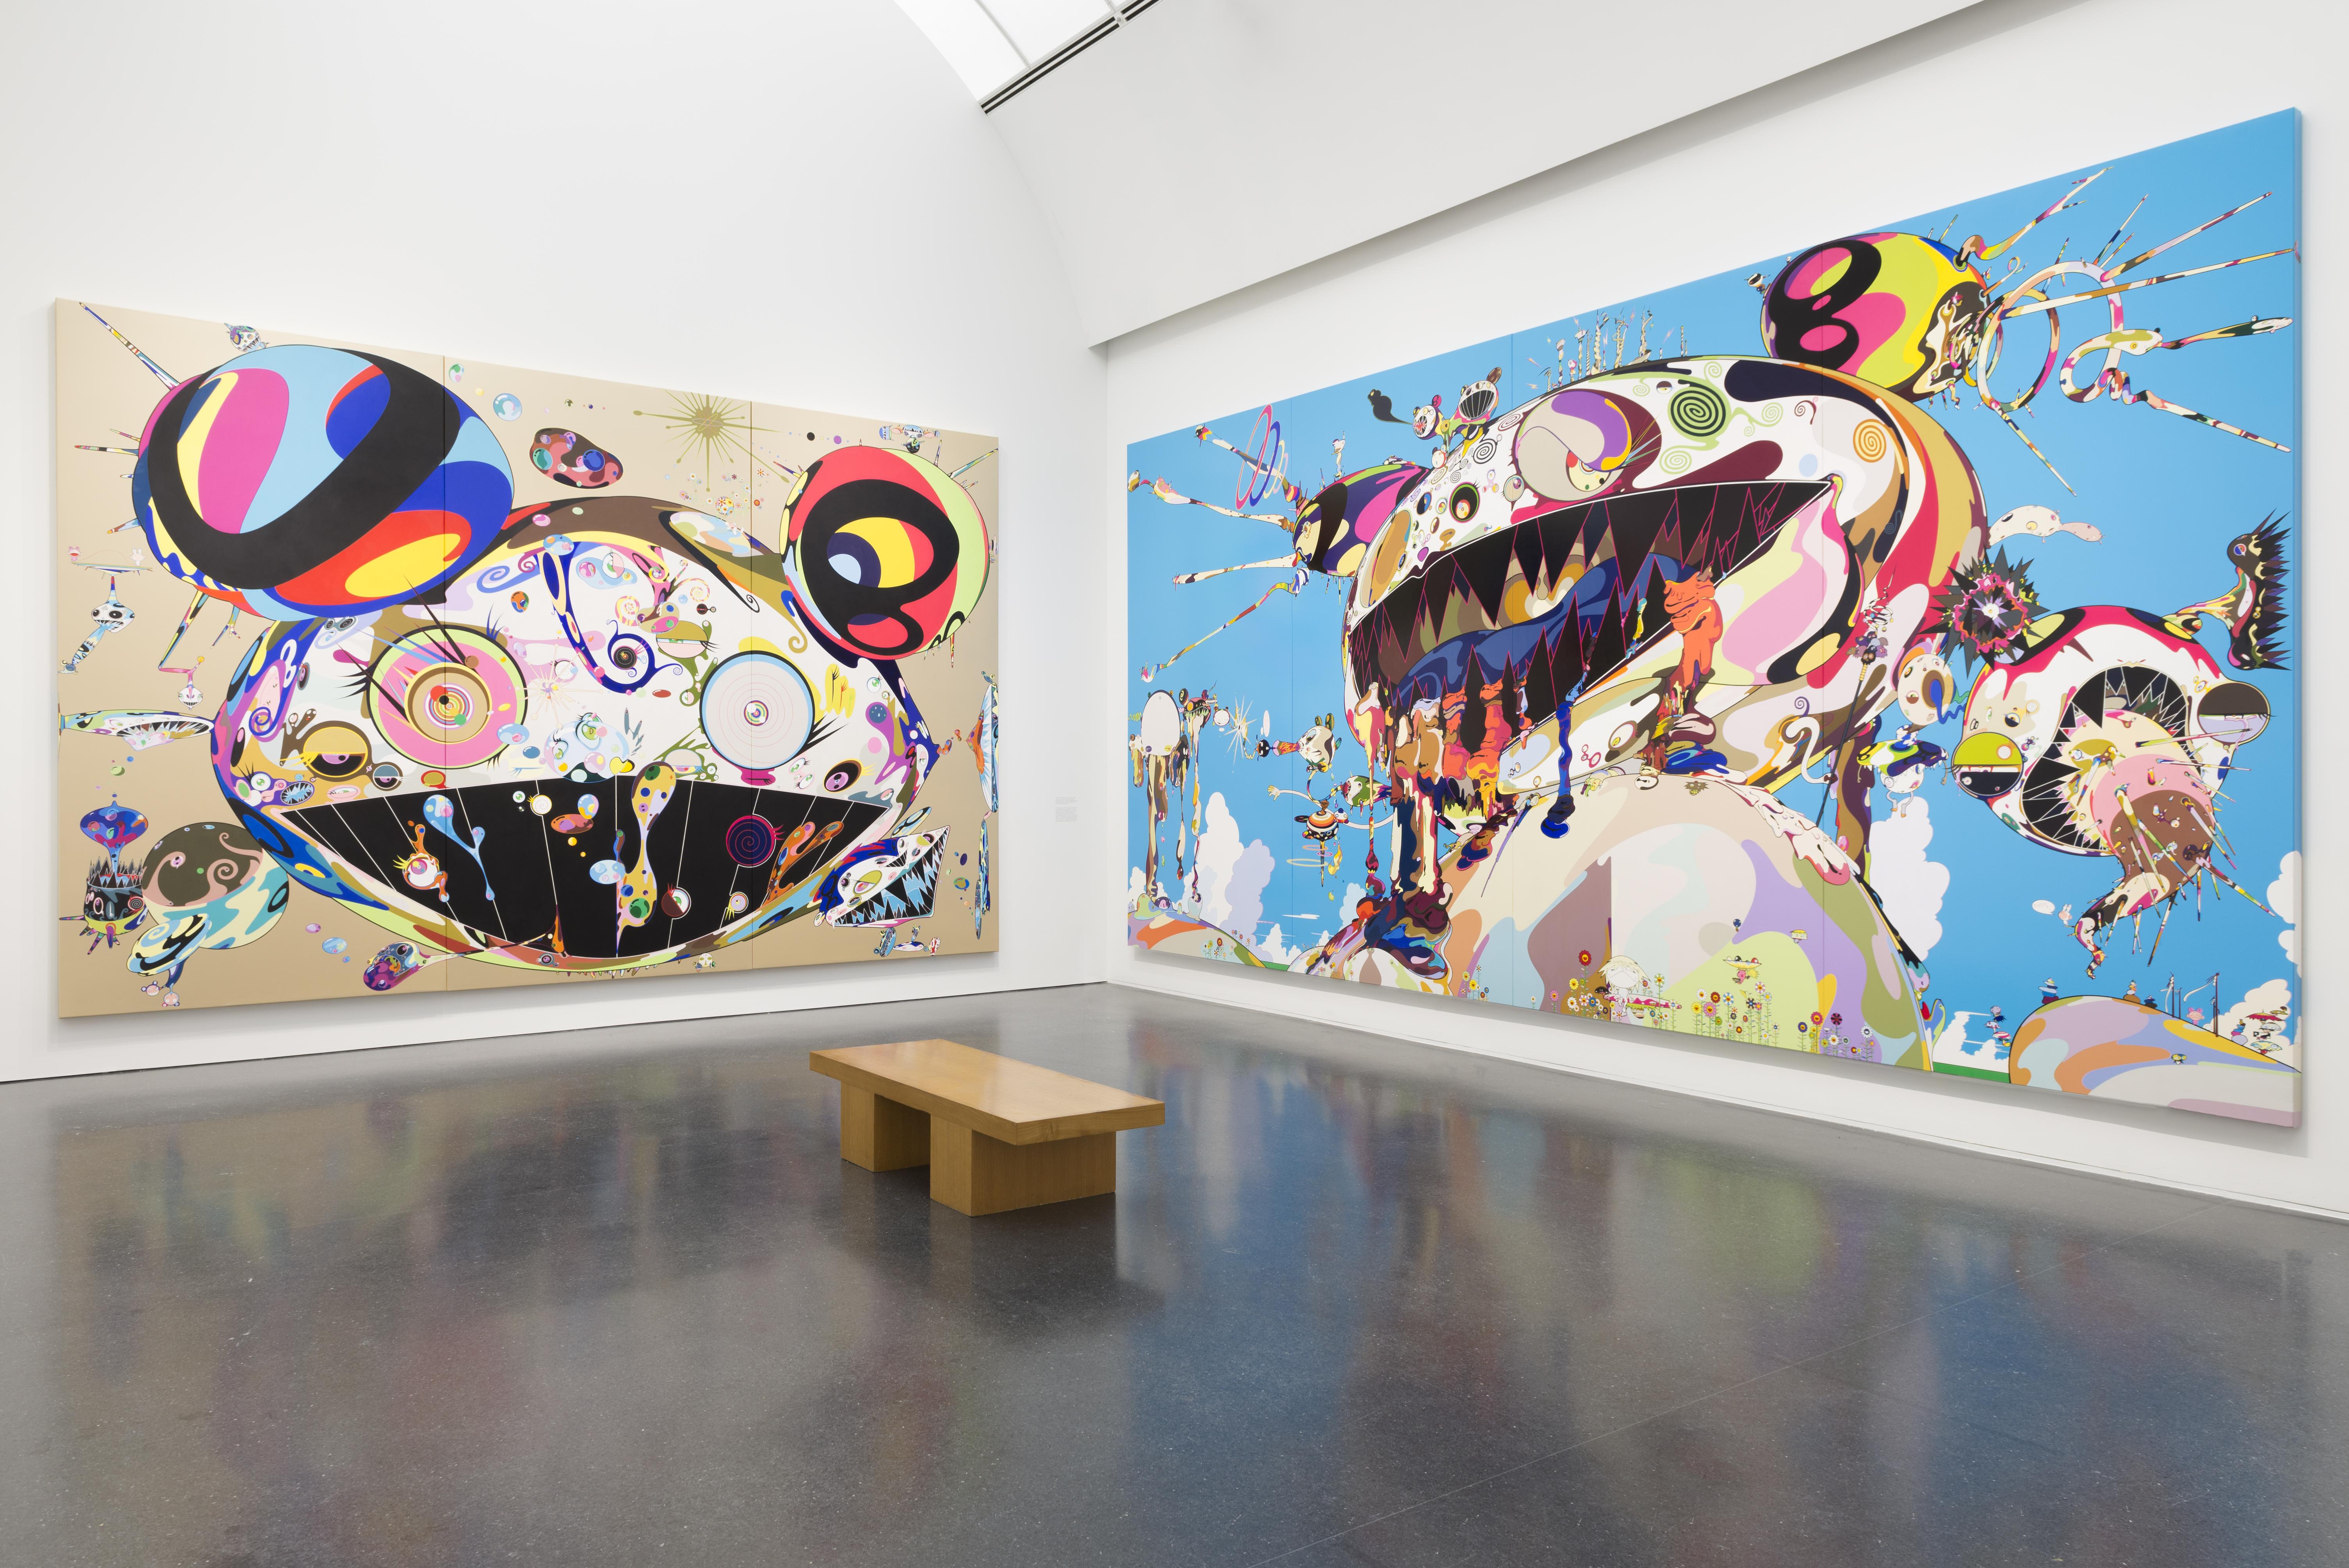 I recently visited the Takashi Murakami exhibit in Chicago and I